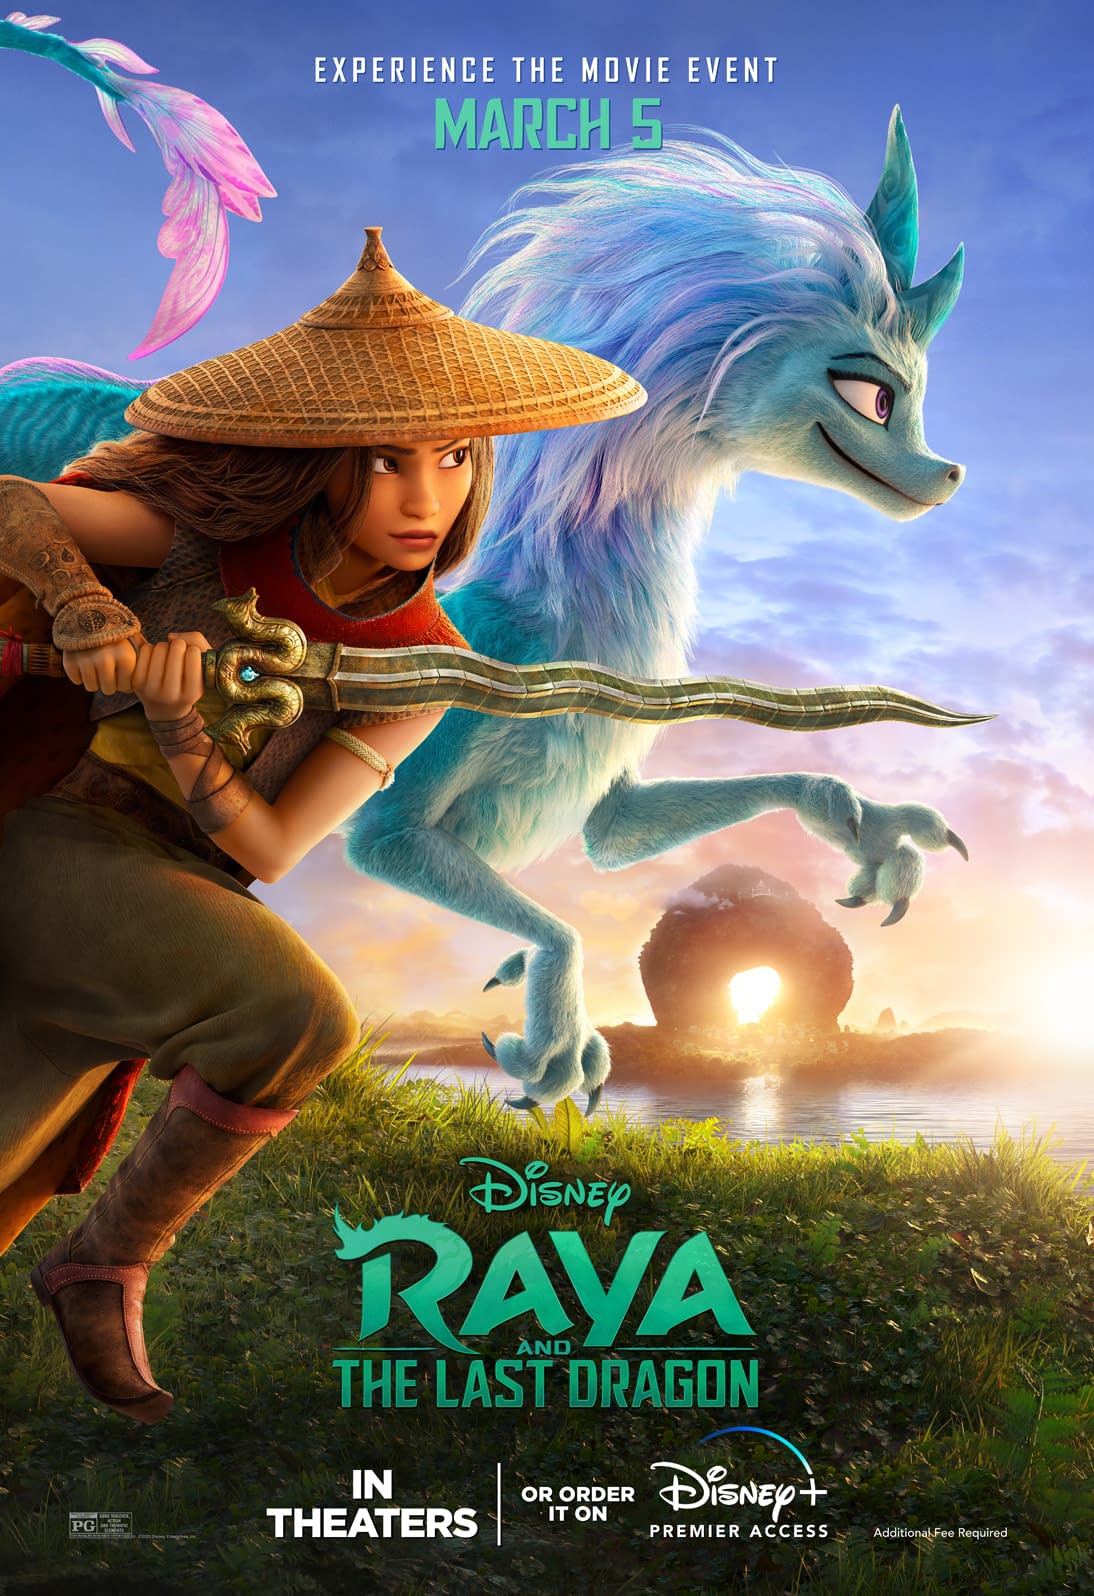 Raya and the Last Dragon: New Trailer, Poster, and Image